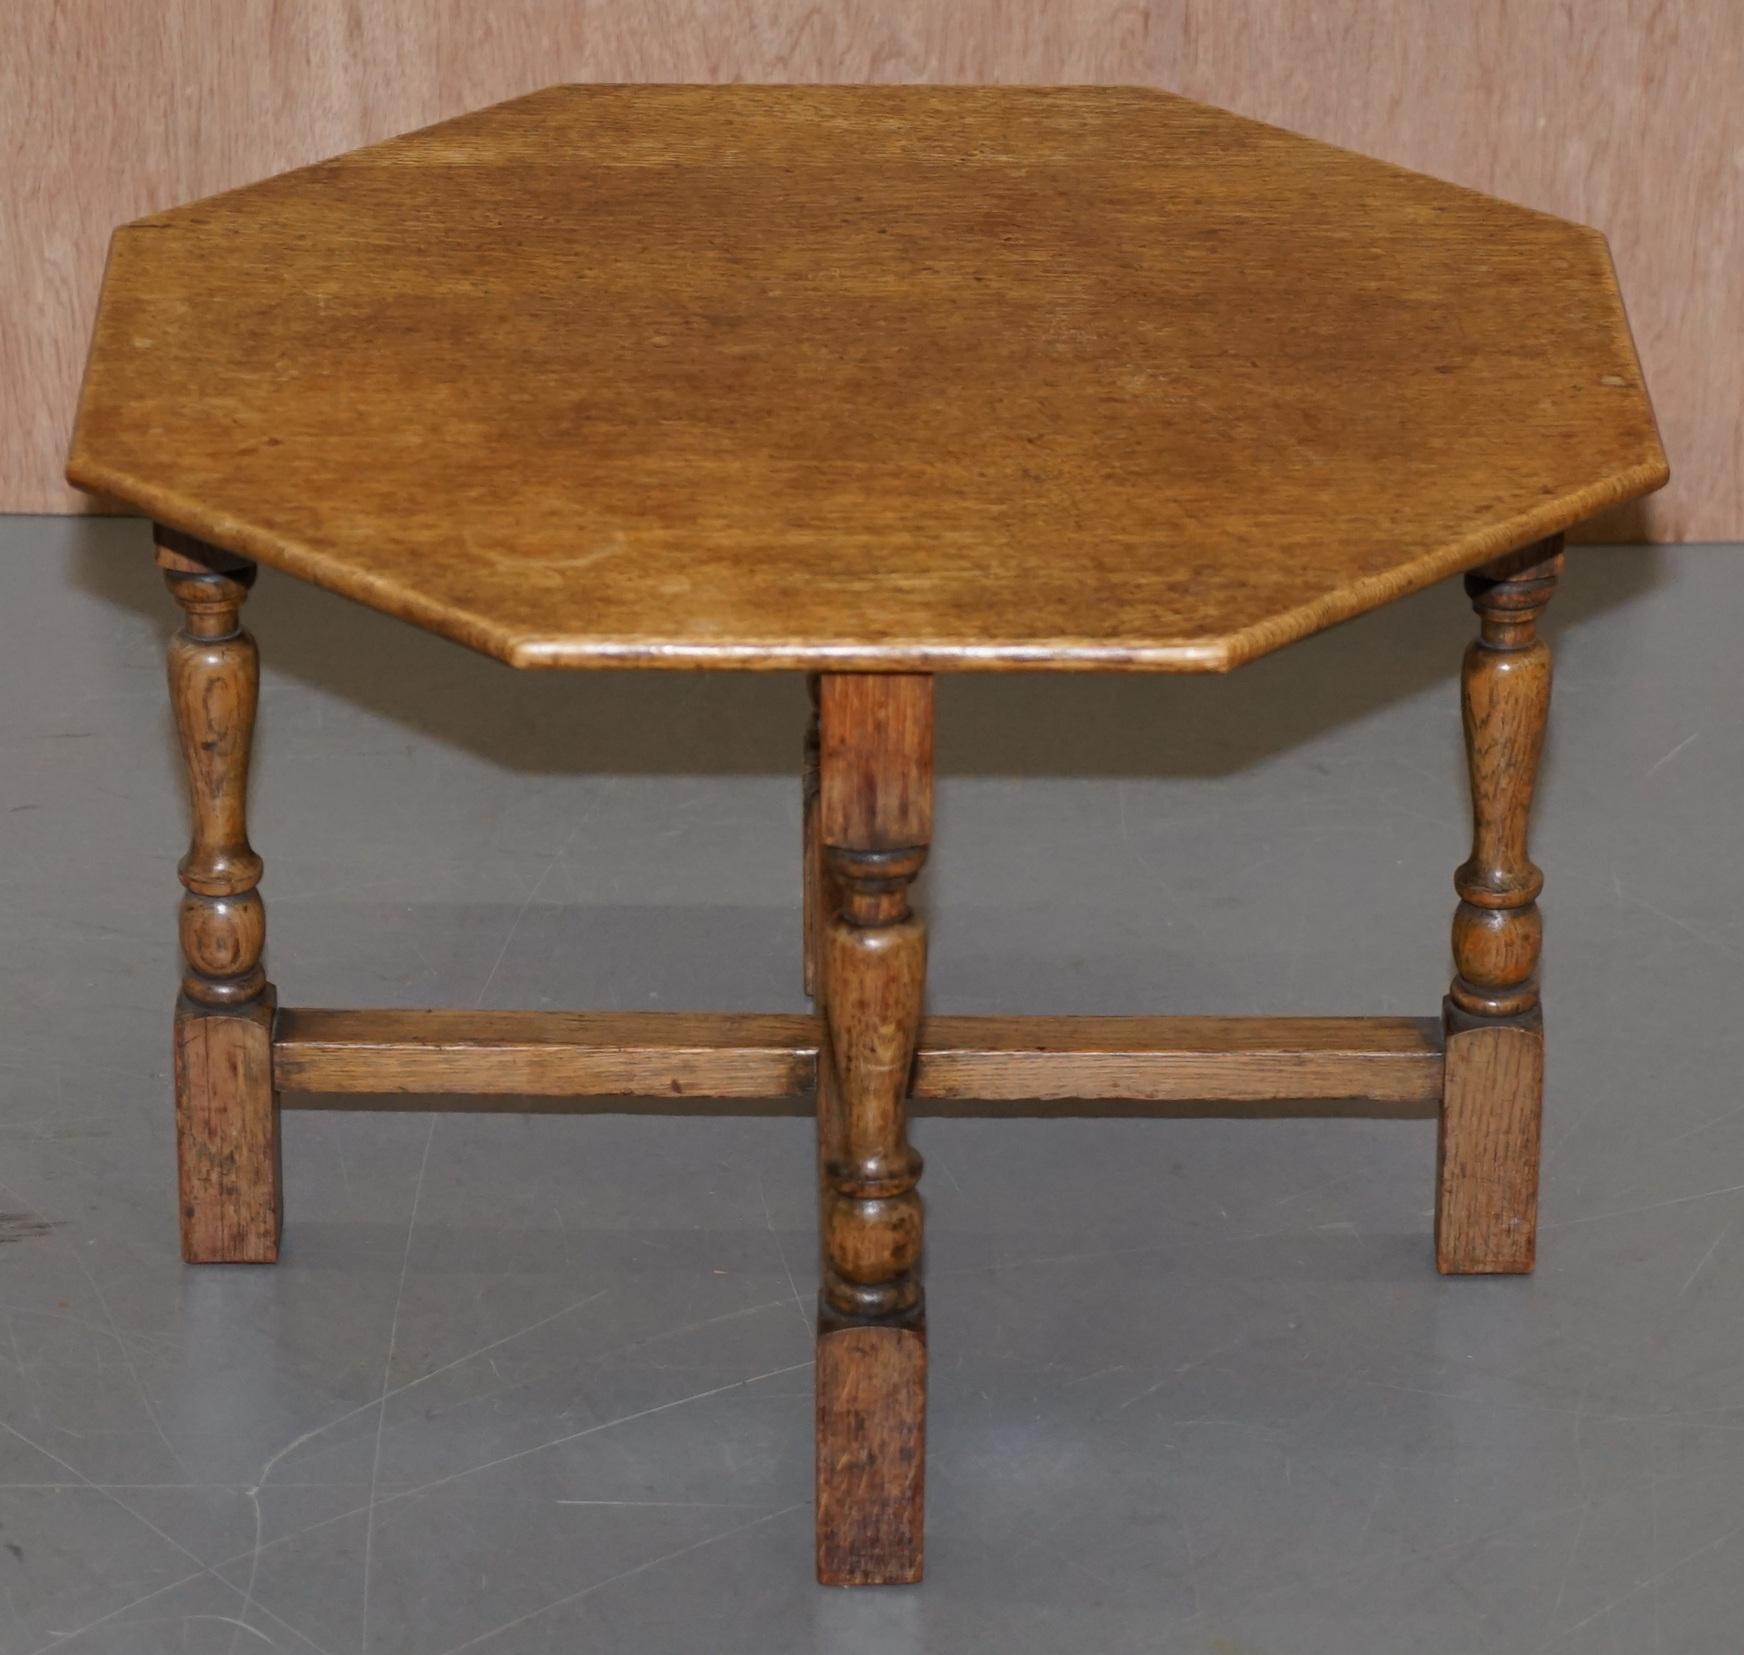 We are delighted to offer for sale this lovely circa 1950s English oak octagonal coffee table numerically stamped to the base bought from an Air Ministry sale

A very good looking and decorative table. It can be used as a medium sized coffee table